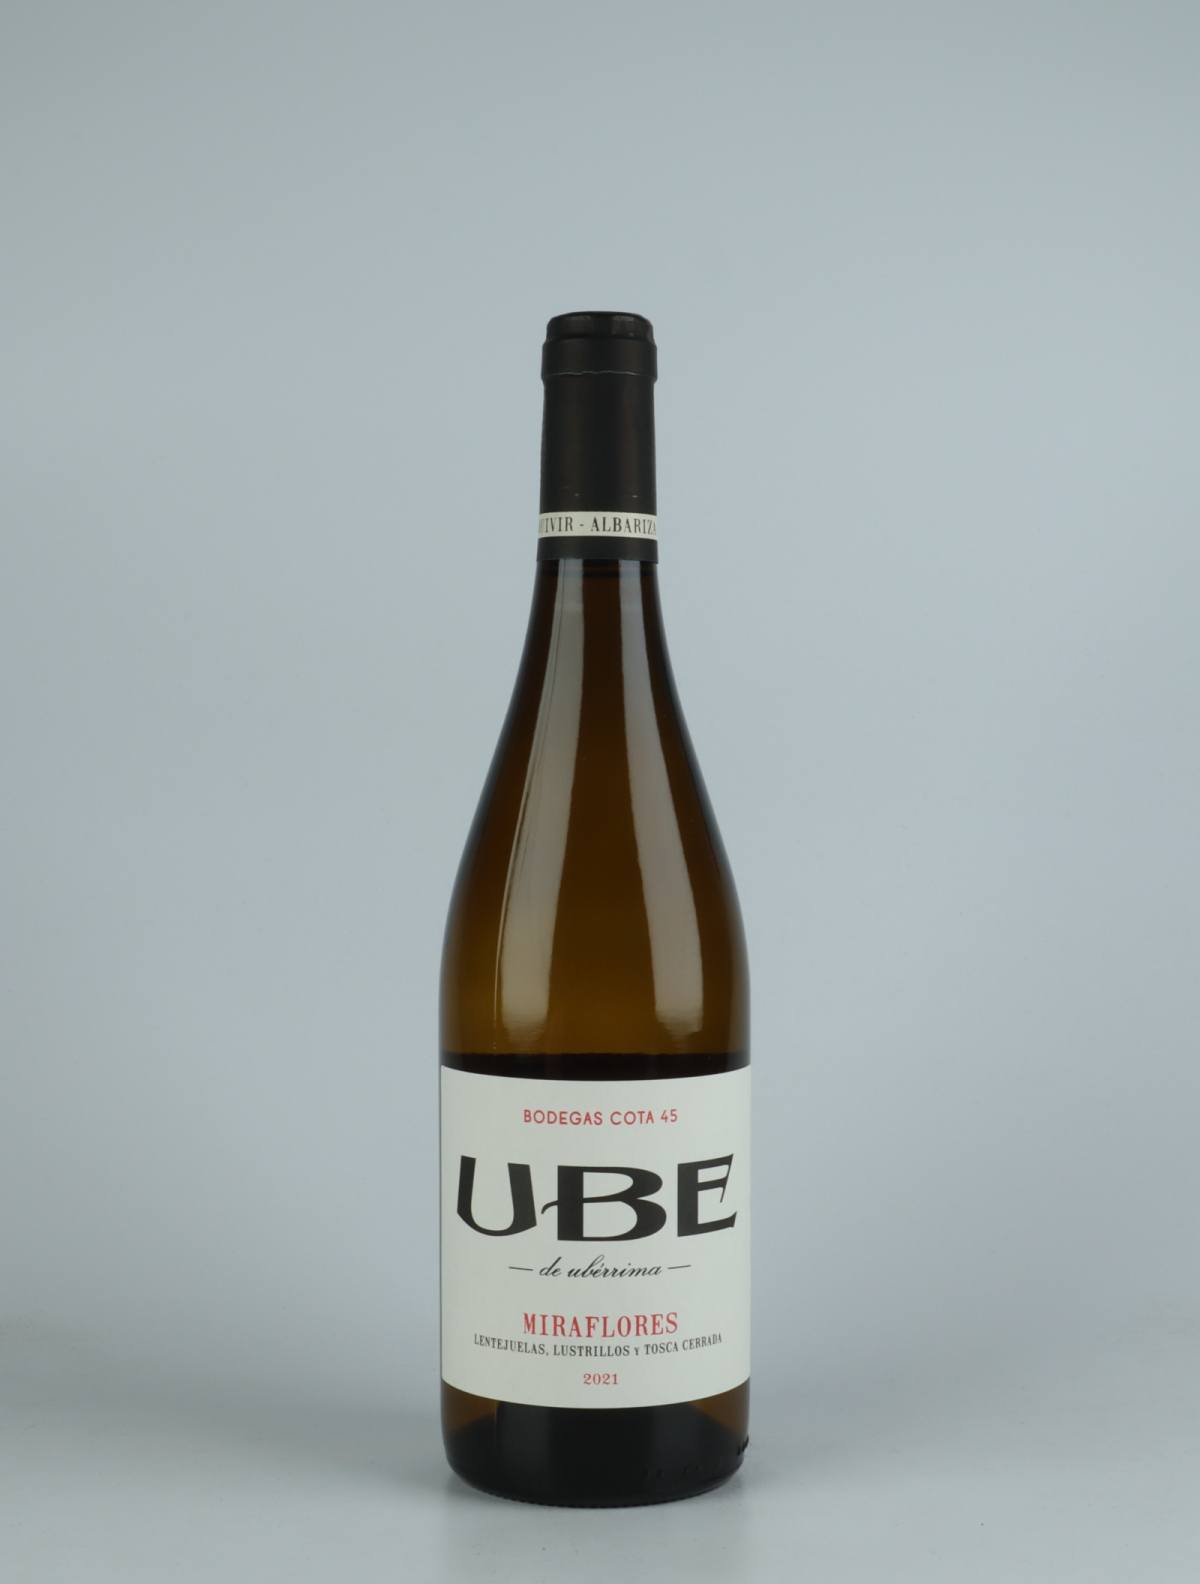 A bottle 2021 UBE Miraflores White wine from Bodegas Cota 45, Andalucia in Spain